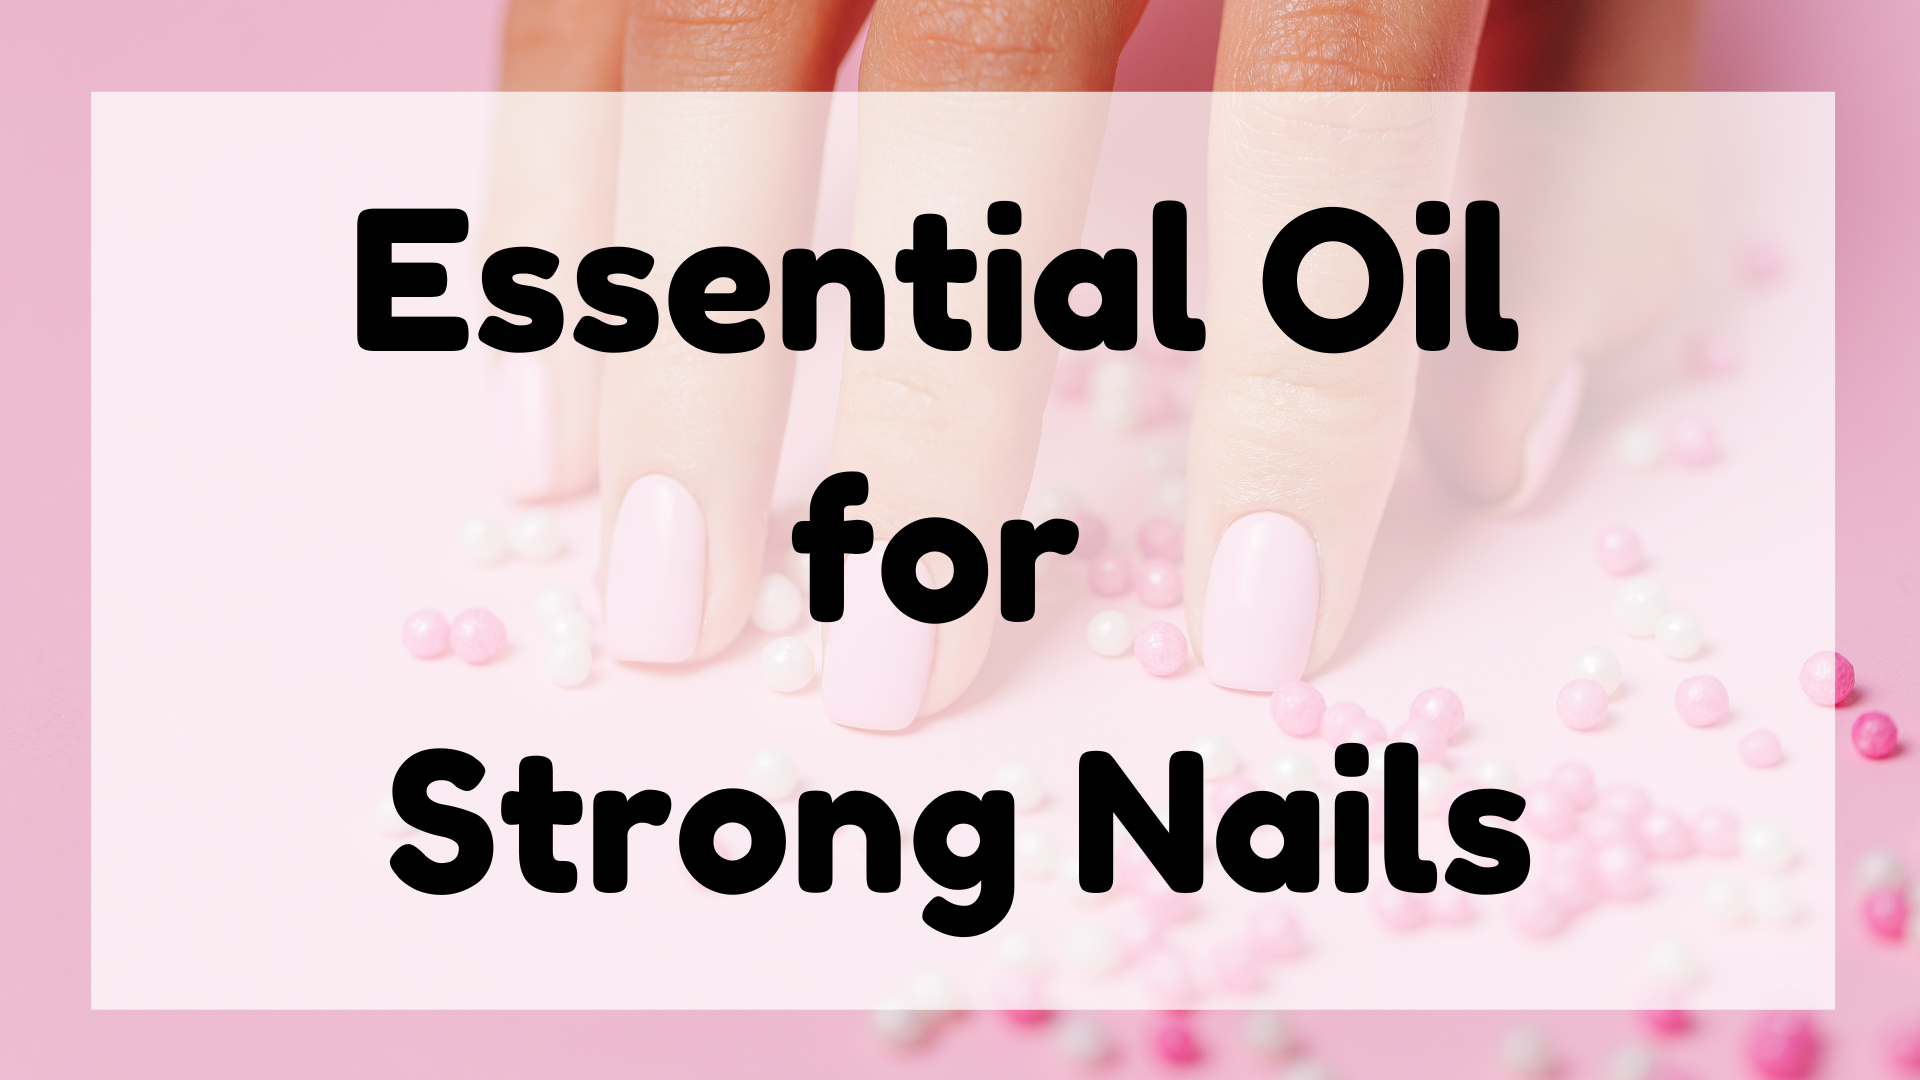 Essential Oil for Strong Nails featured image